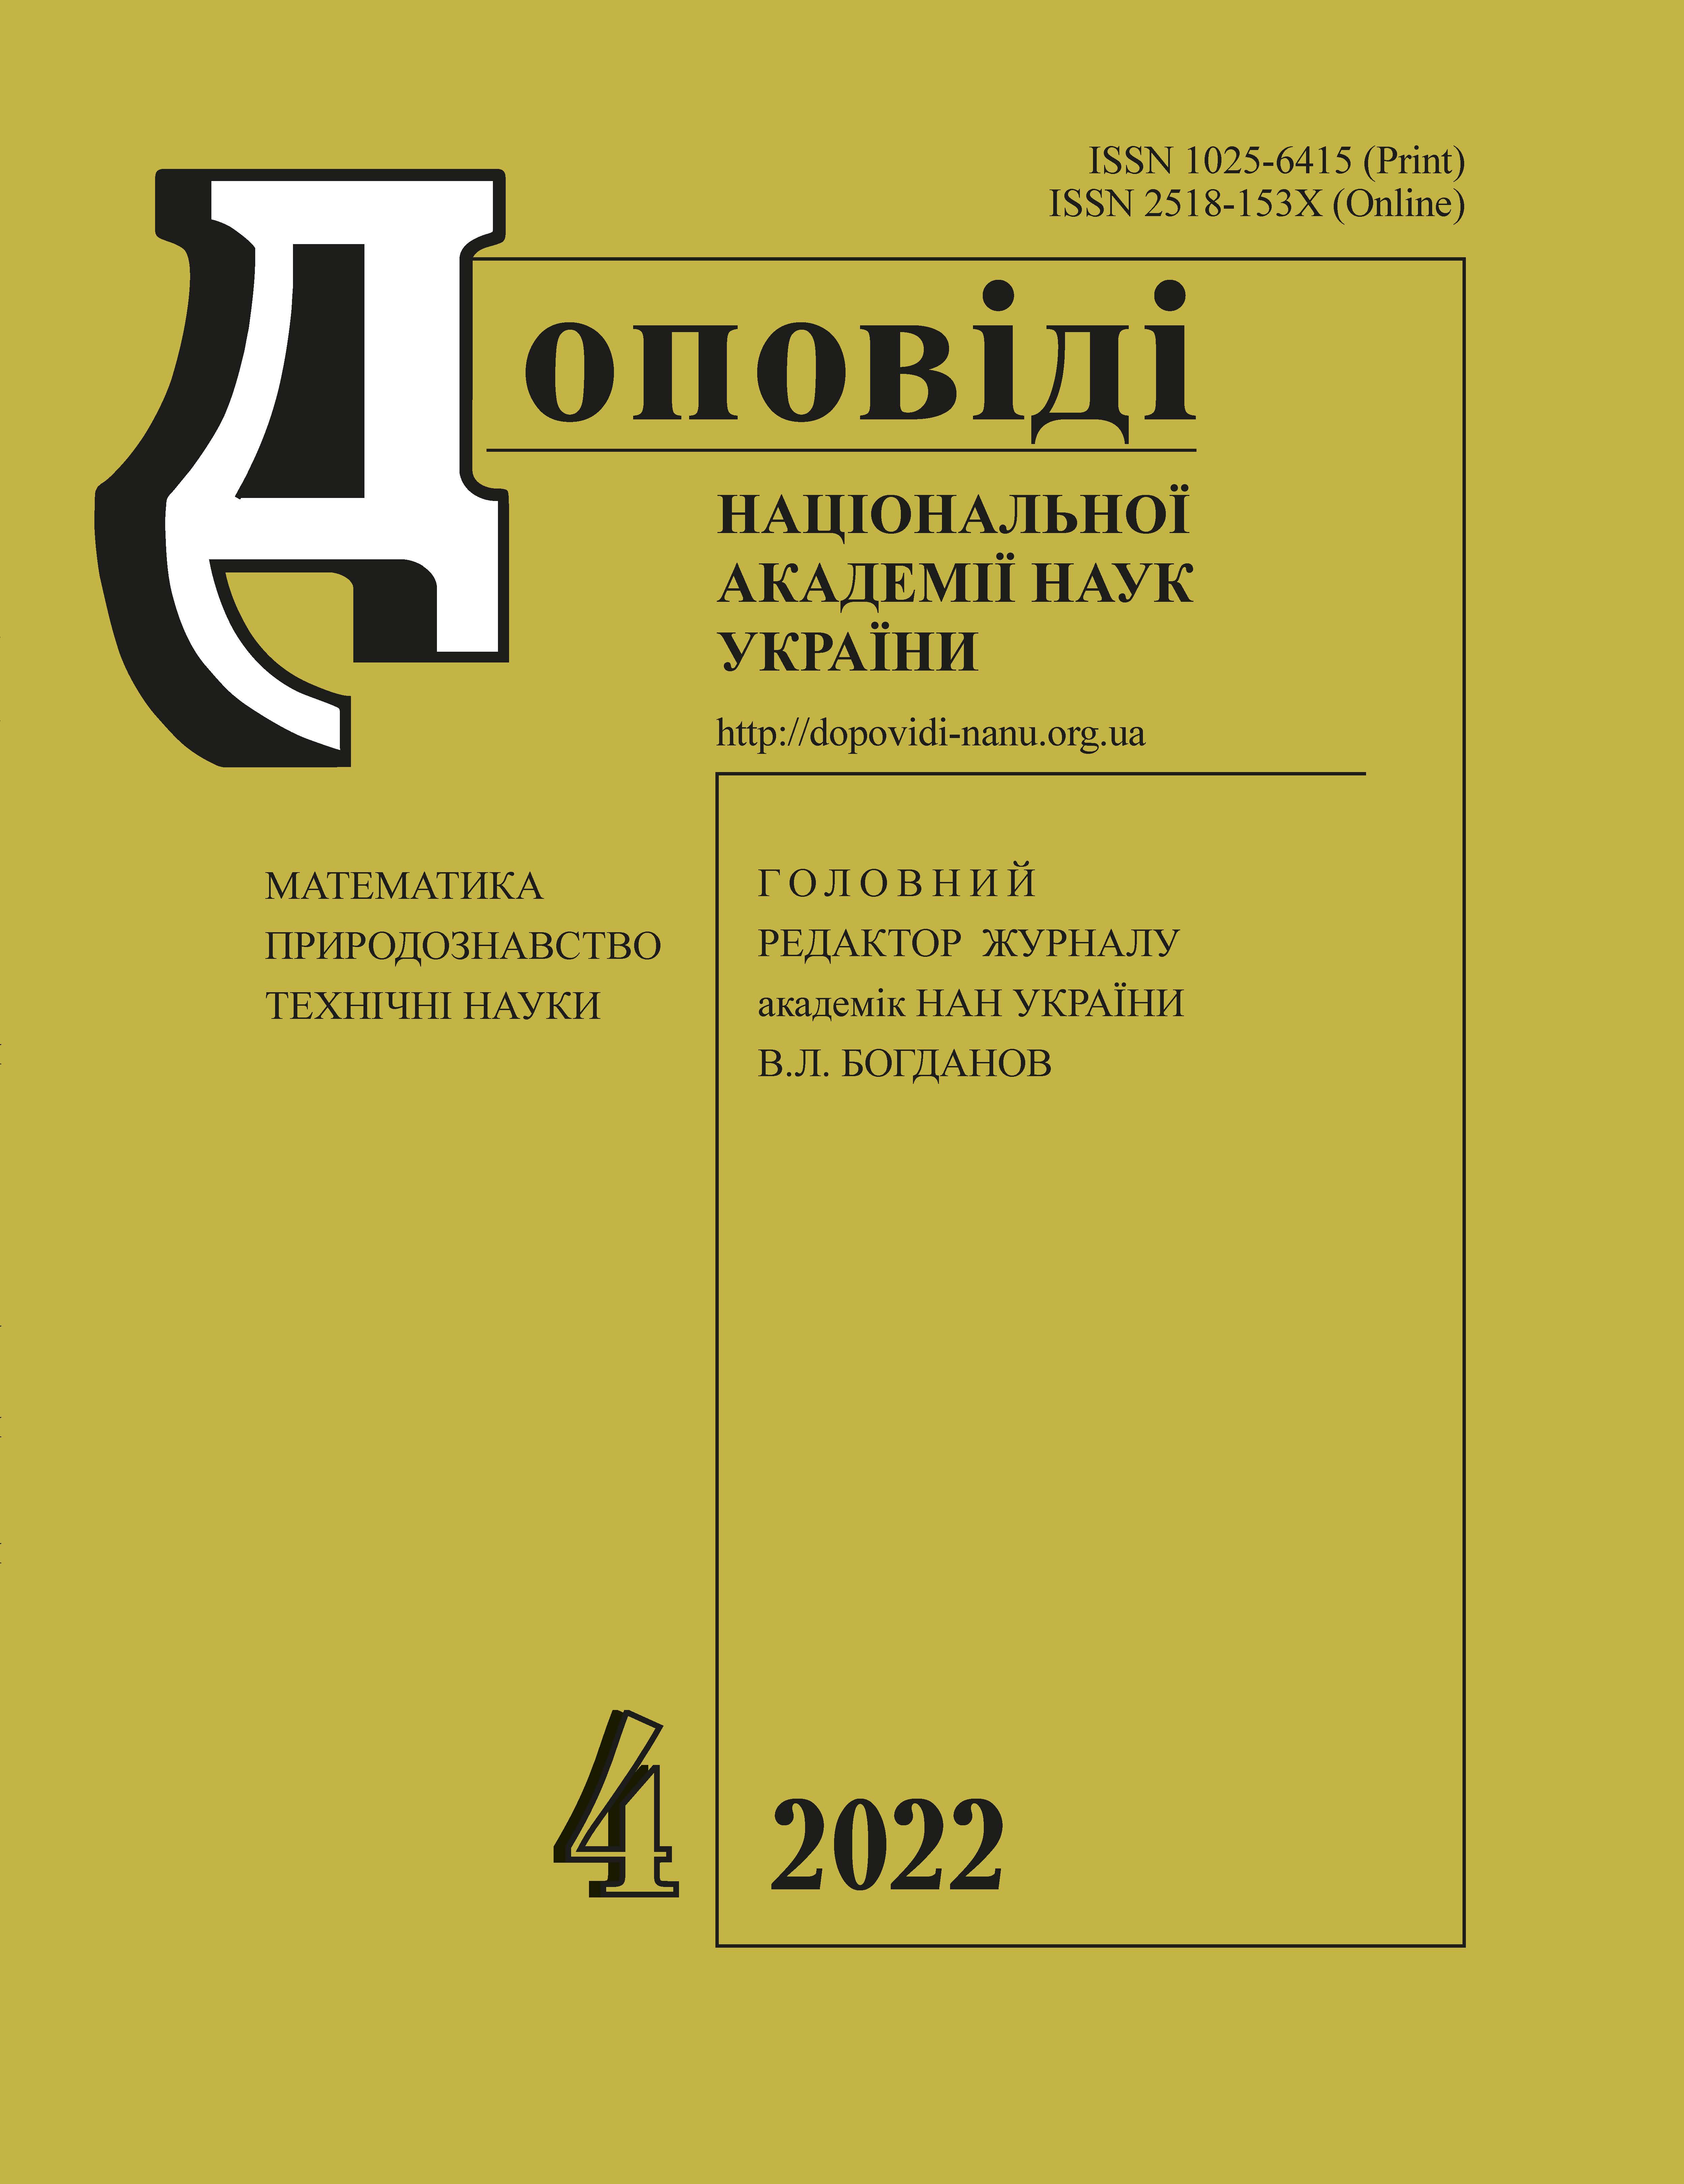 					View No. 4 (2022): Reports of the National Academy of Sciences of Ukraine
				